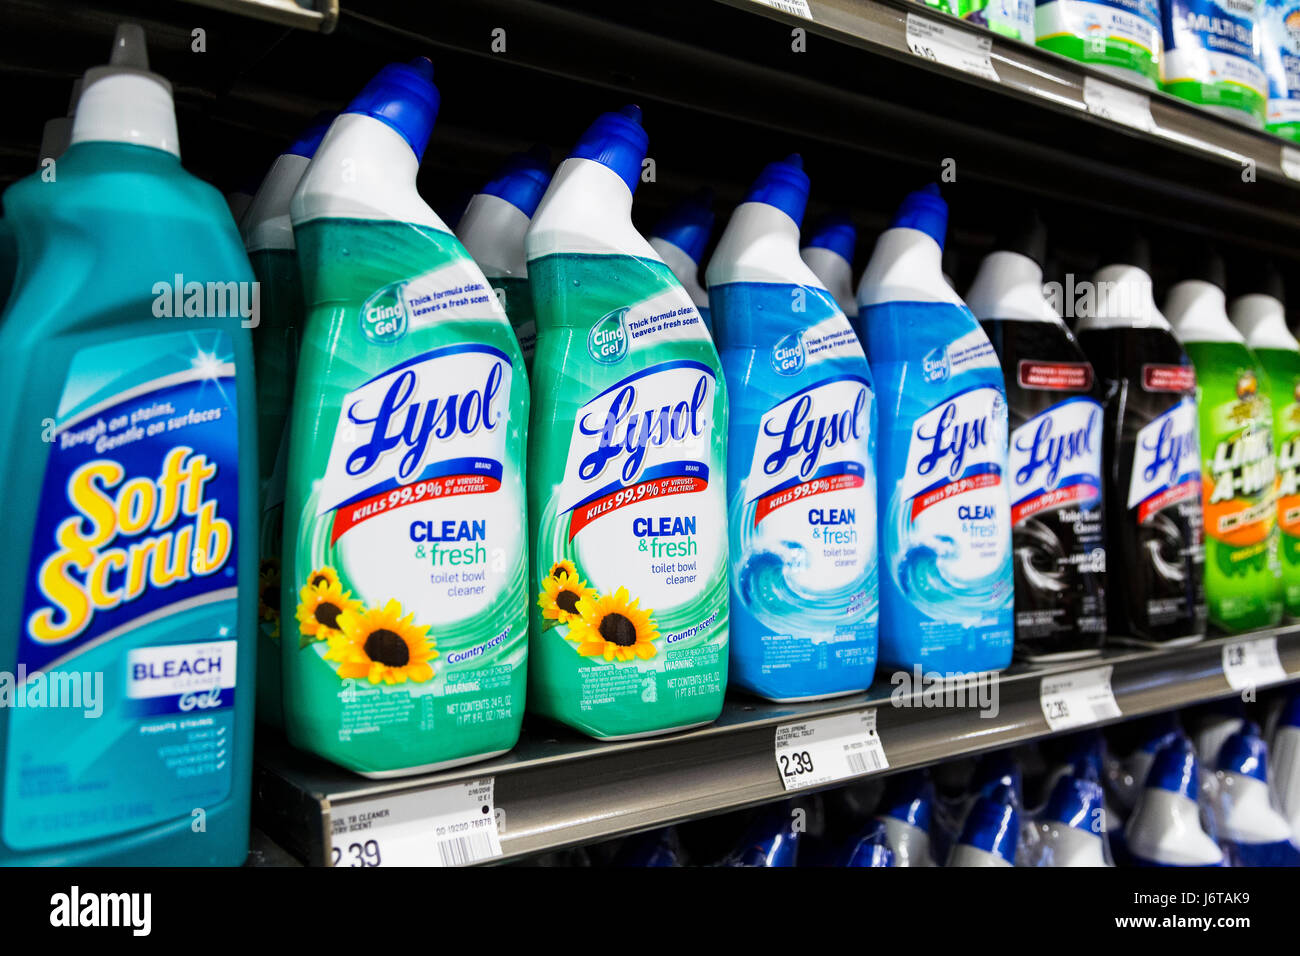 cleaning products brand names